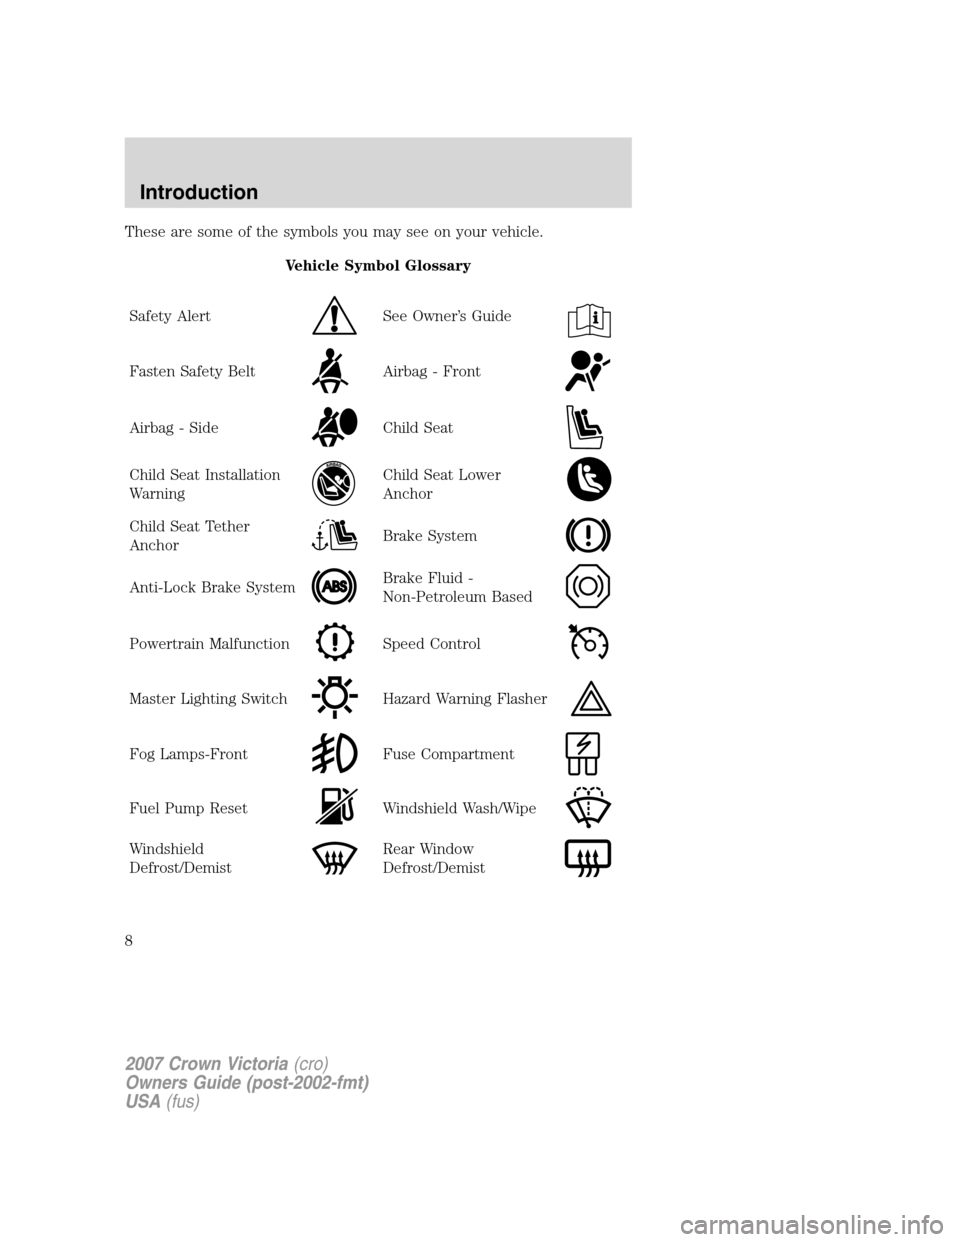 FORD CROWN VICTORIA 2007 2.G Owners Manual These are some of the symbols you may see on your vehicle.
Vehicle Symbol Glossary
Safety Alert
See Owner’s Guide
Fasten Safety BeltAirbag - Front
Airbag - SideChild Seat
Child Seat Installation
War